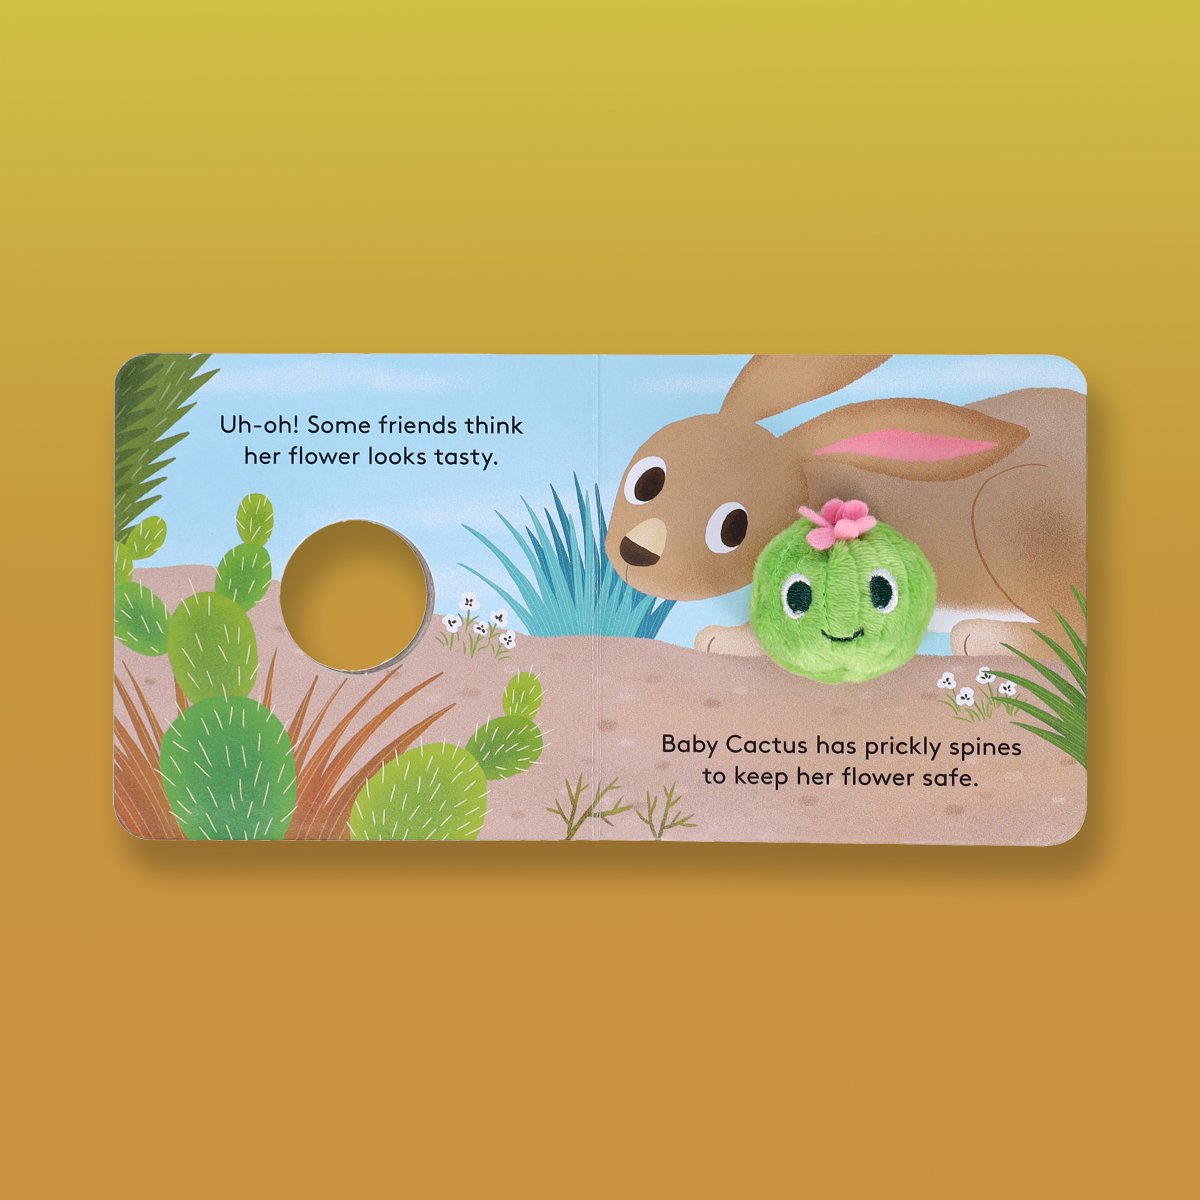 Double the cuddles, double the fun!🌵🌻 Meet Baby Sunflower & Baby Cactus, the newest additions to your young reader(s)' adventures! With its plush character & adorable illustrations, it's sure to be a favorite for both parents & little ones. Available now at the link in bio🔗